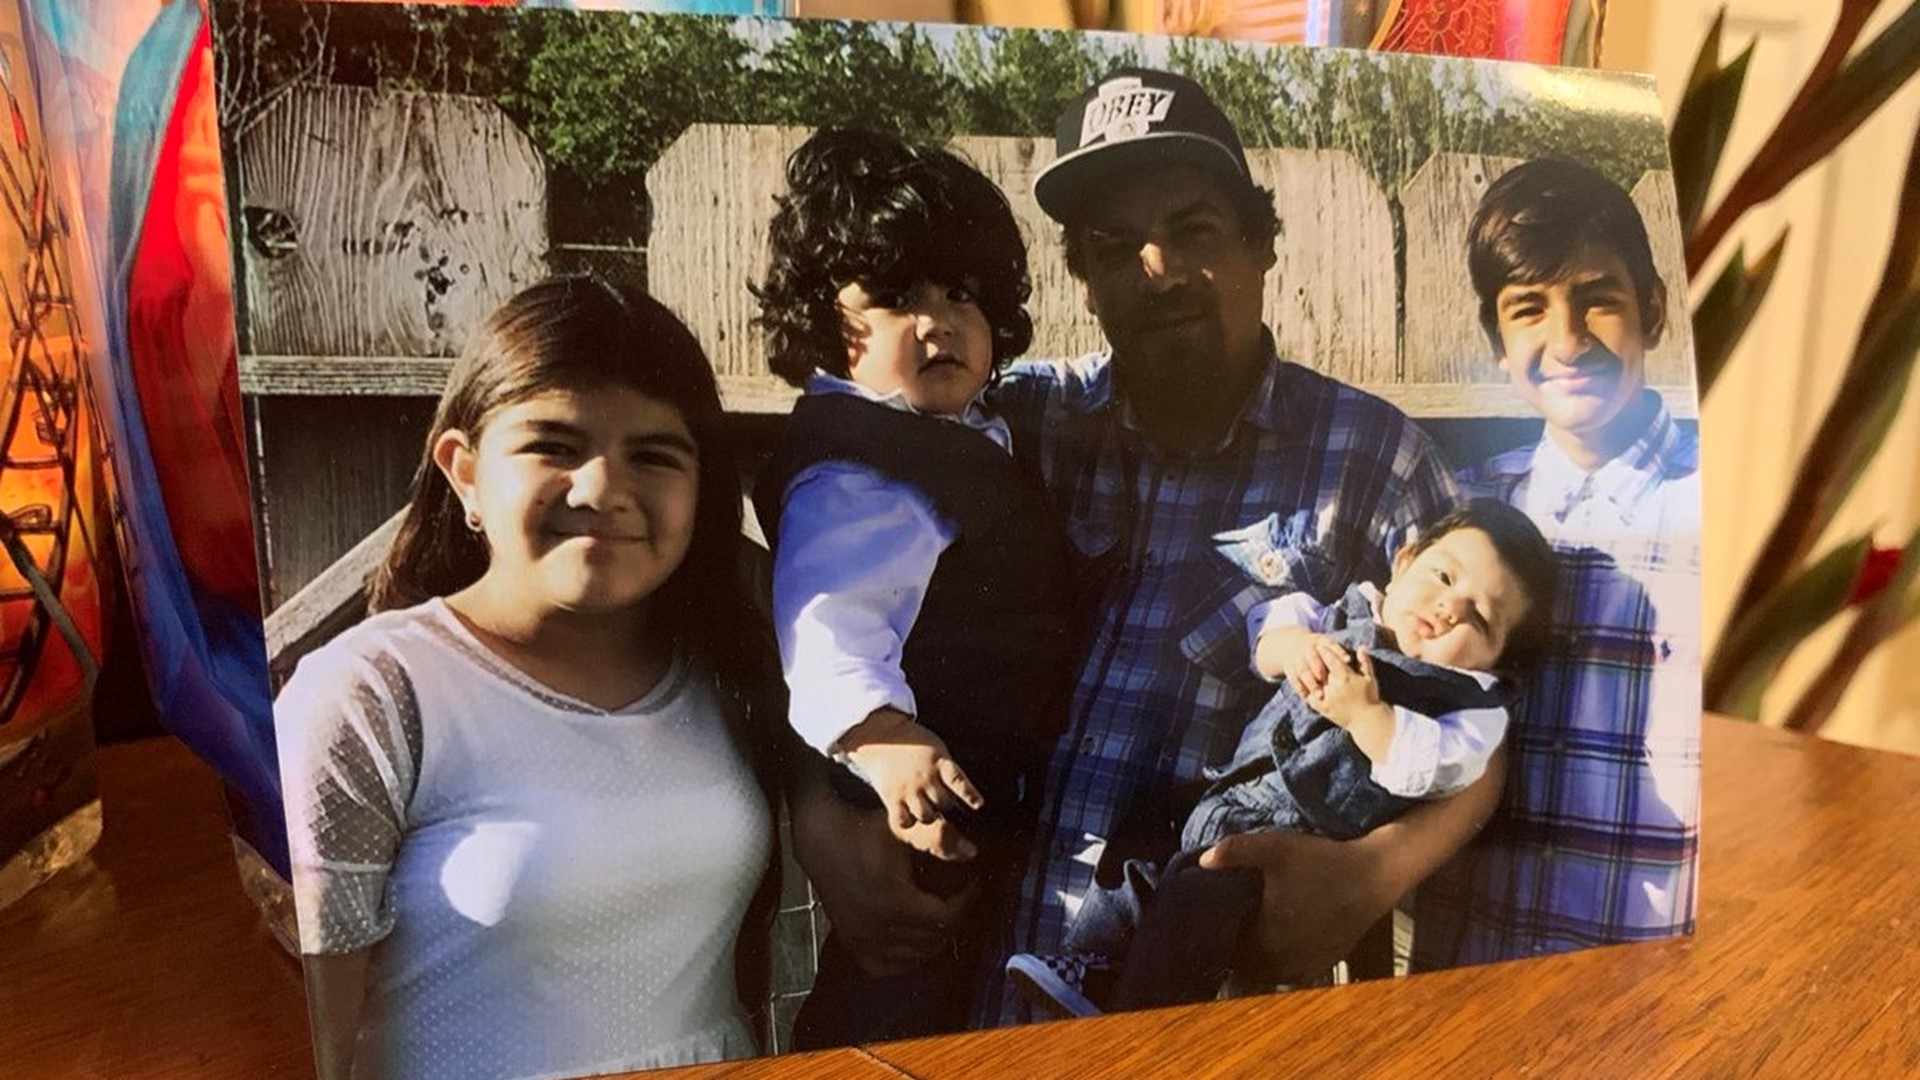 The families of Pedro Gil and Melchor Leyva Fong are reeling after a car crash in Modesto claimed the lives of two fathers of four. 8 kids are now left to grow up without their fathers.